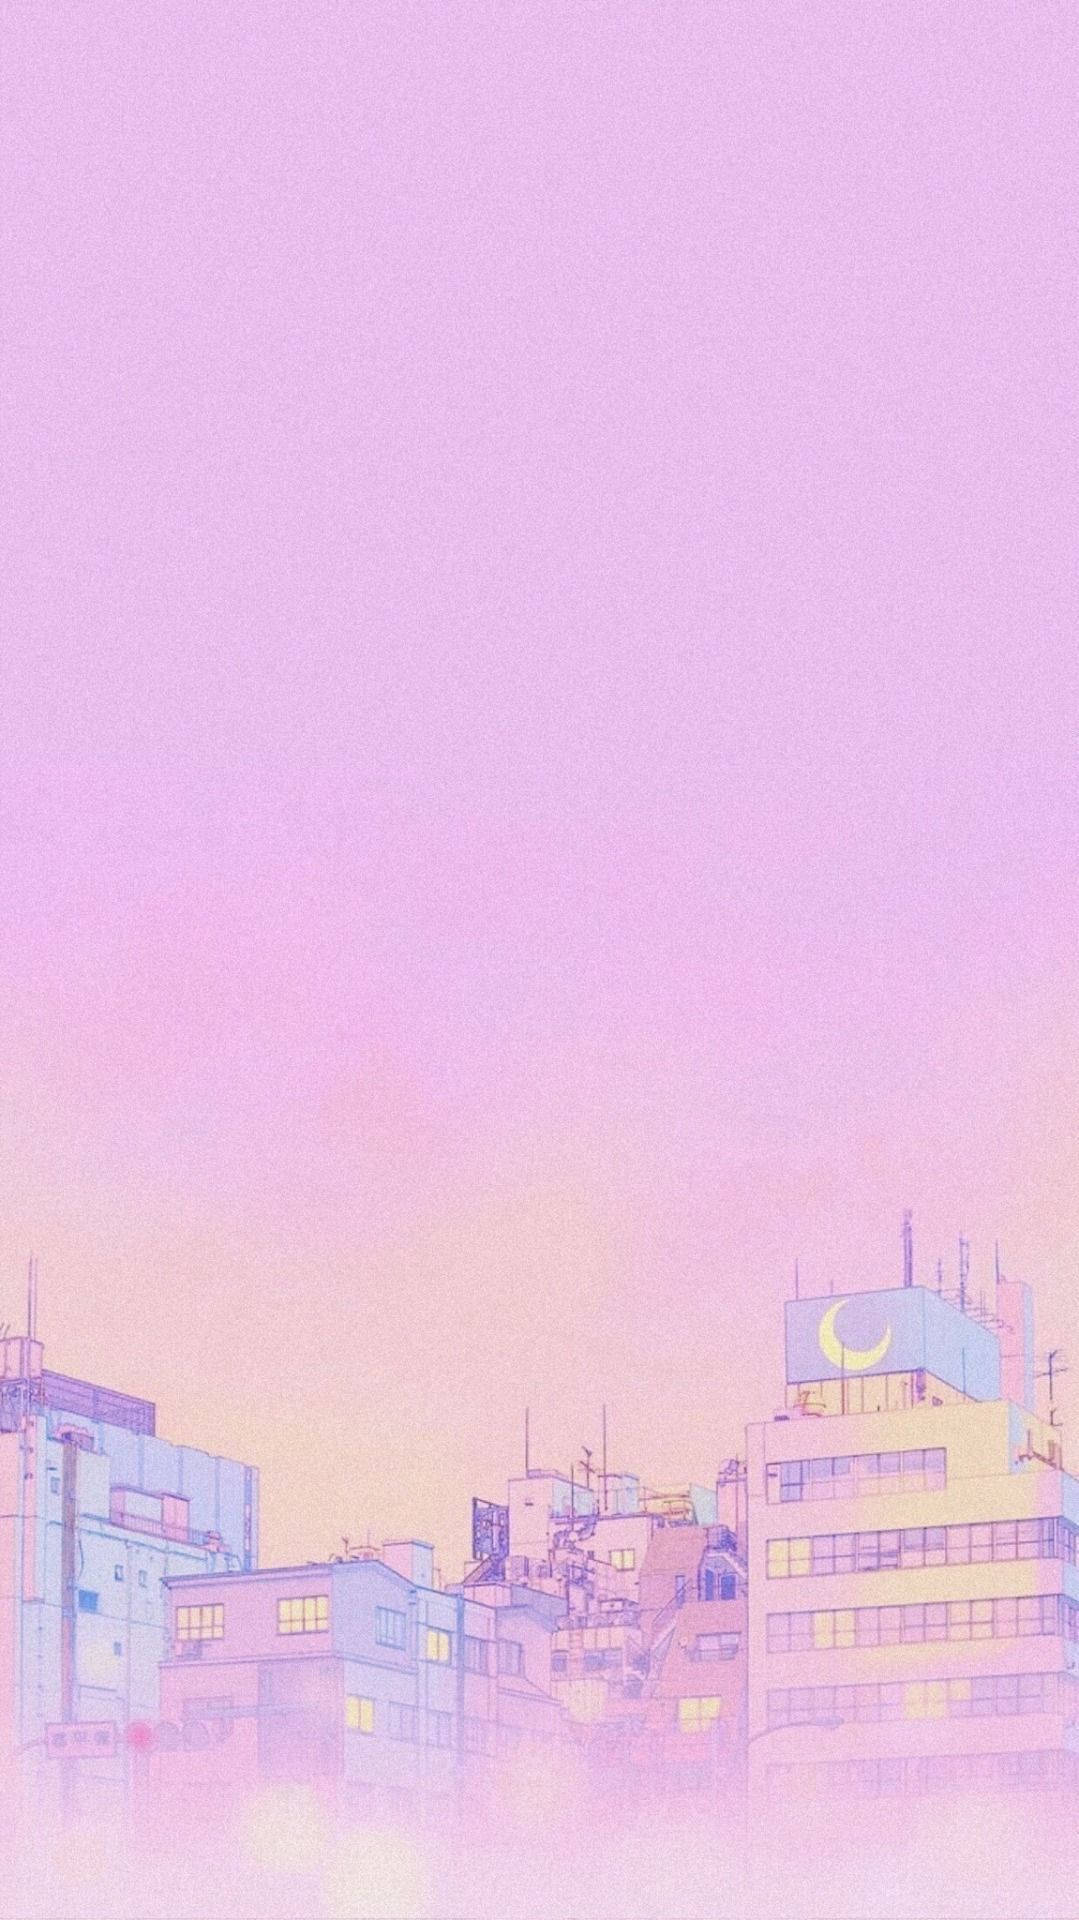 Pink Aesthetic Tumblr Laptop With Sky Wallpaper